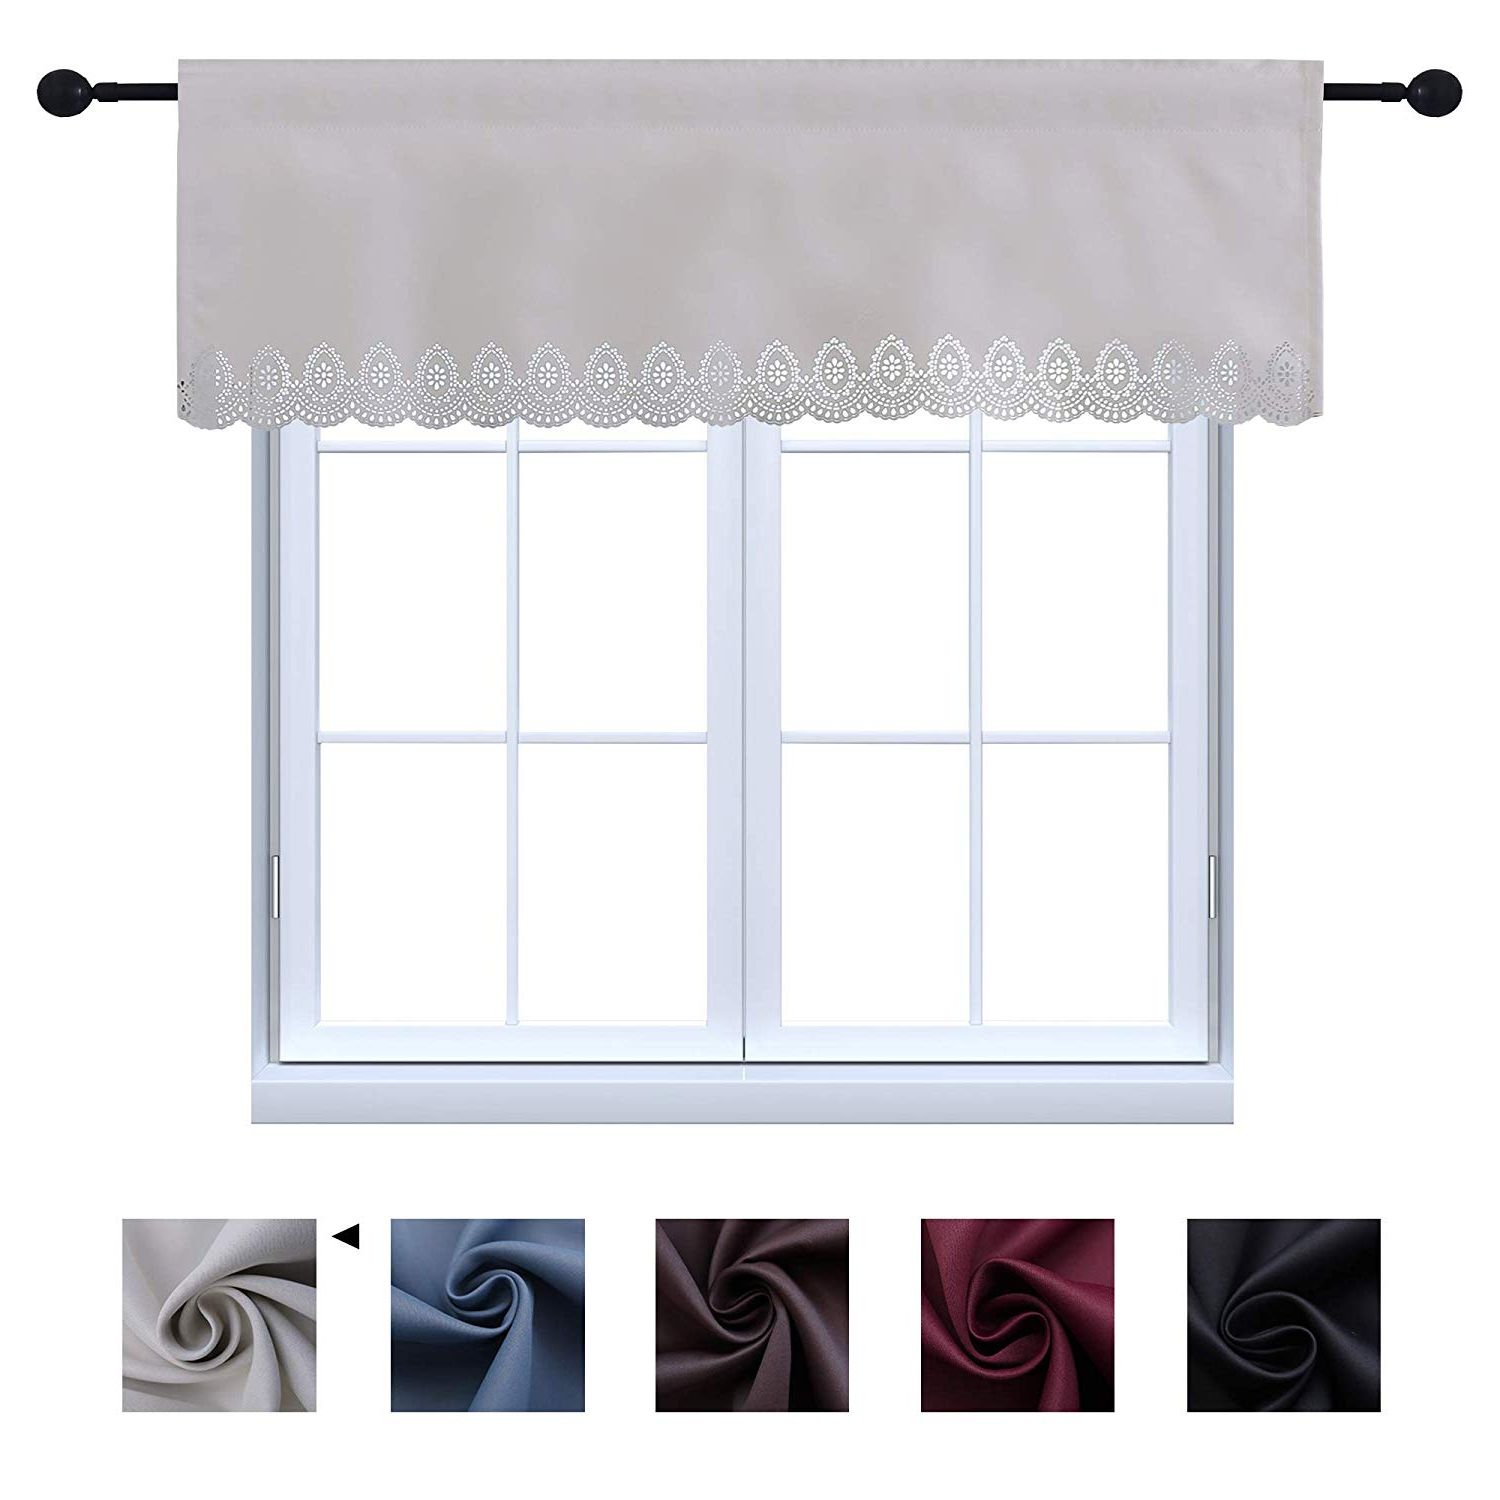 Holking Valances For Windows 18 Inch Valances For Dining Room Thermal  Insulated Hollow Flower Design Drape Shades,beige,1 Pack Intended For Most Popular Circle Curtain Valances (View 8 of 20)